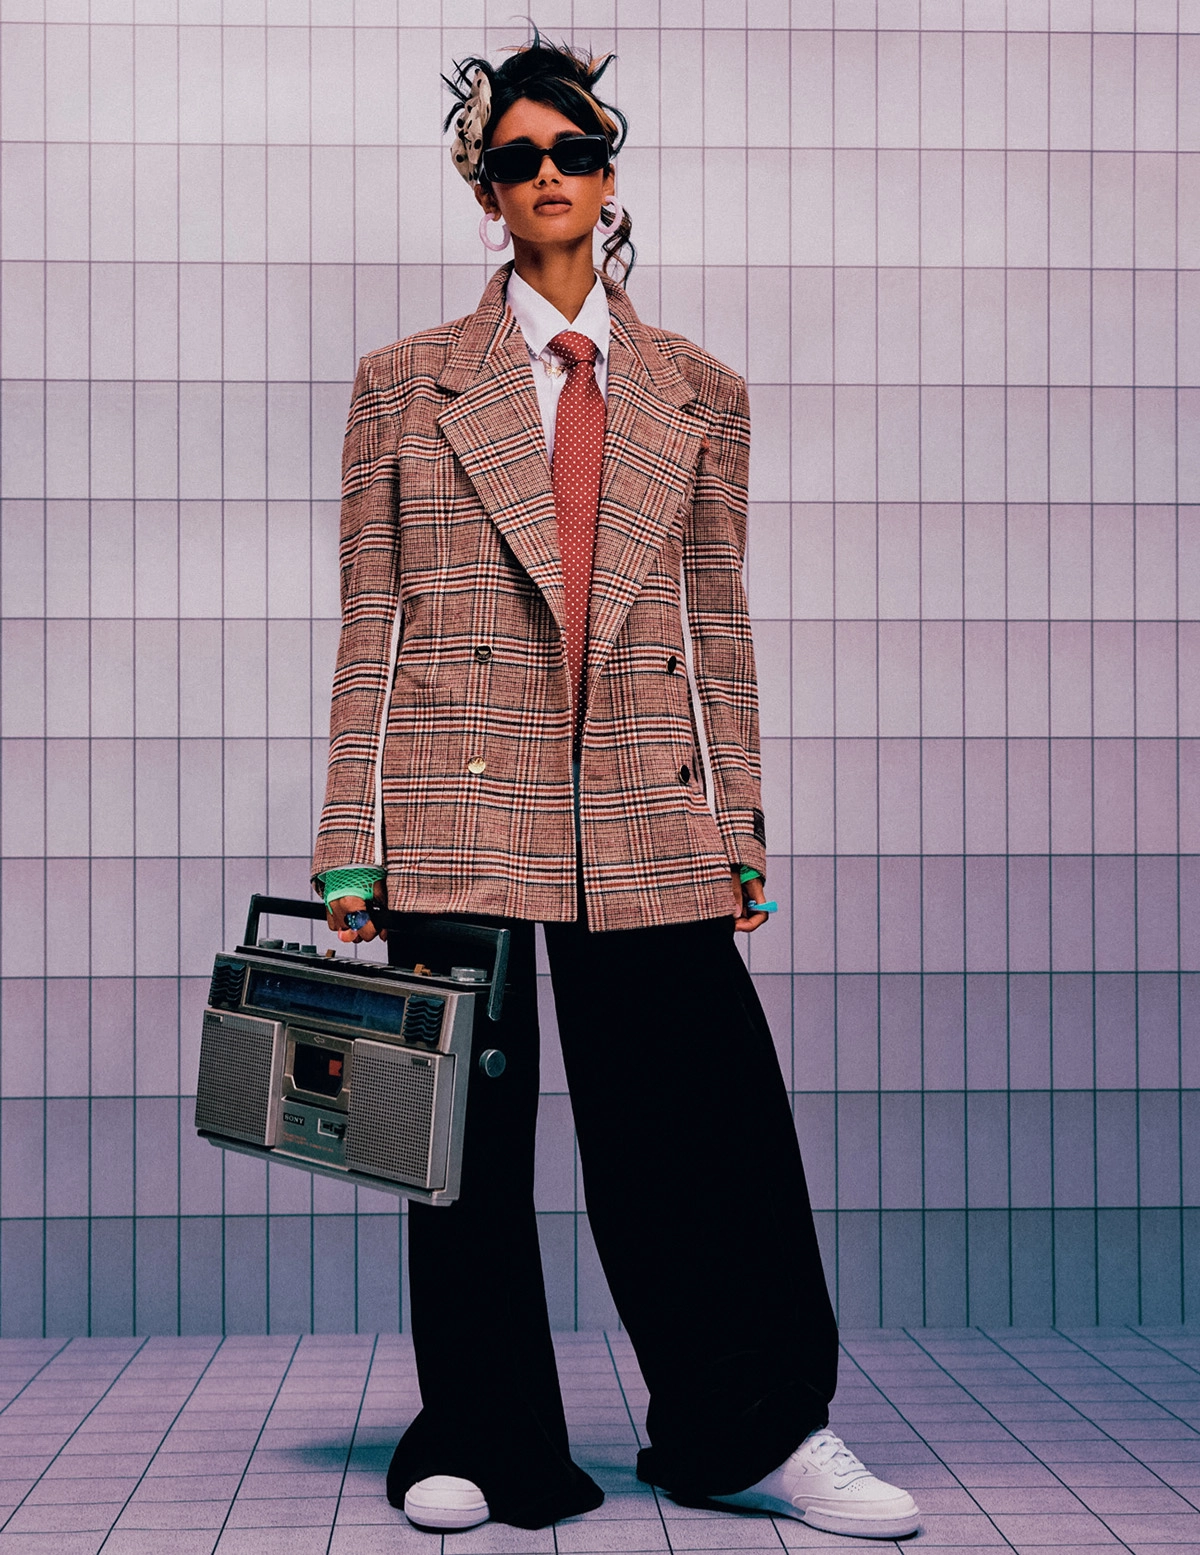 ''Electric Youth'' by Zantz Han for Vogue Singapore October 2022